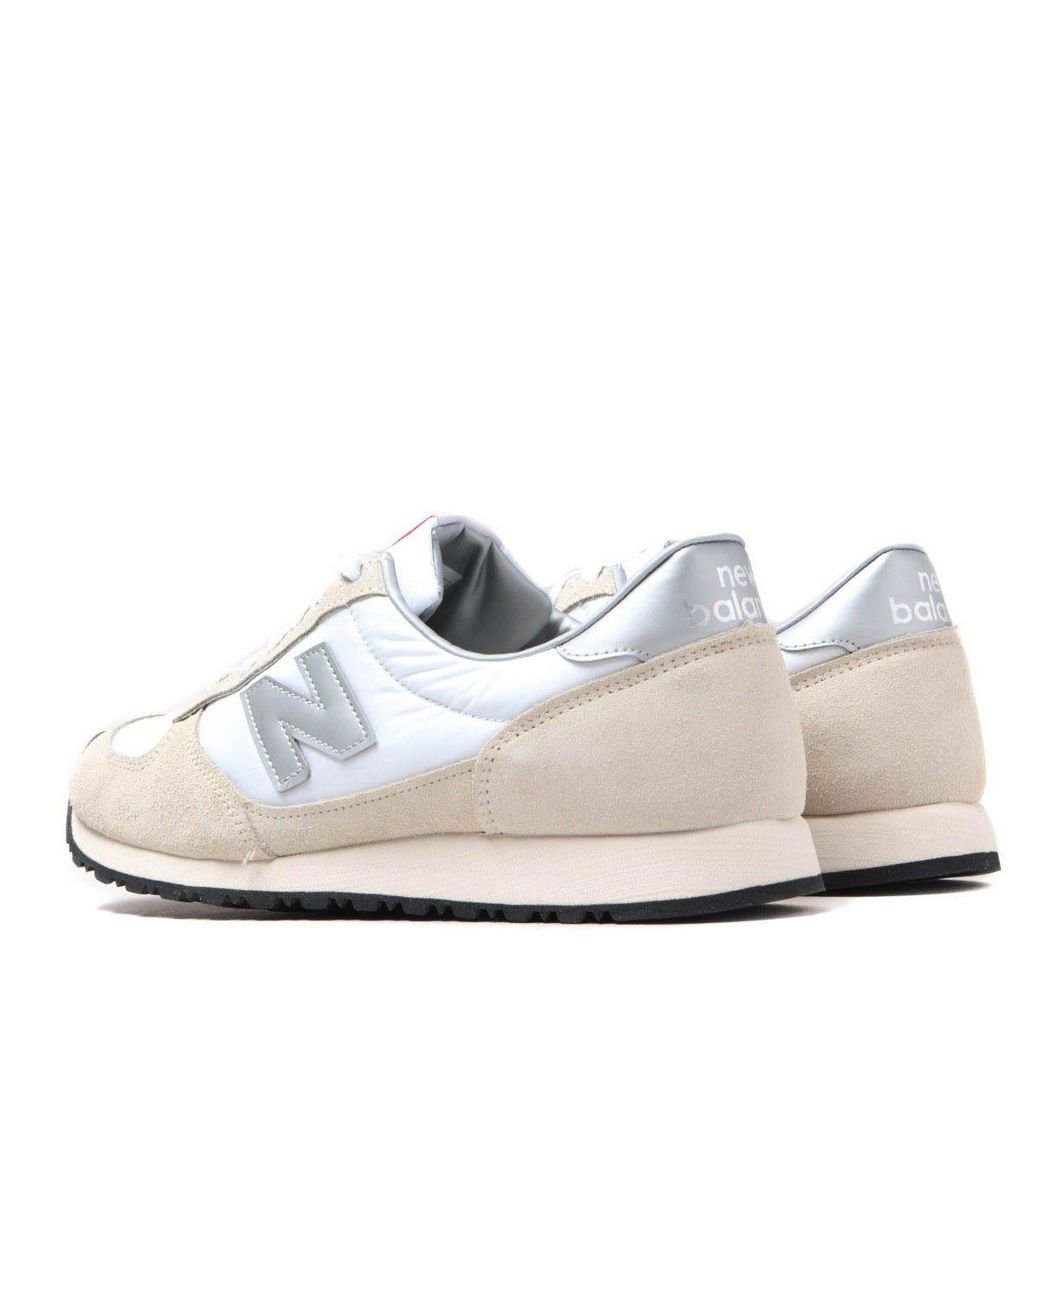 New Balance Made In England Mnc Beige 